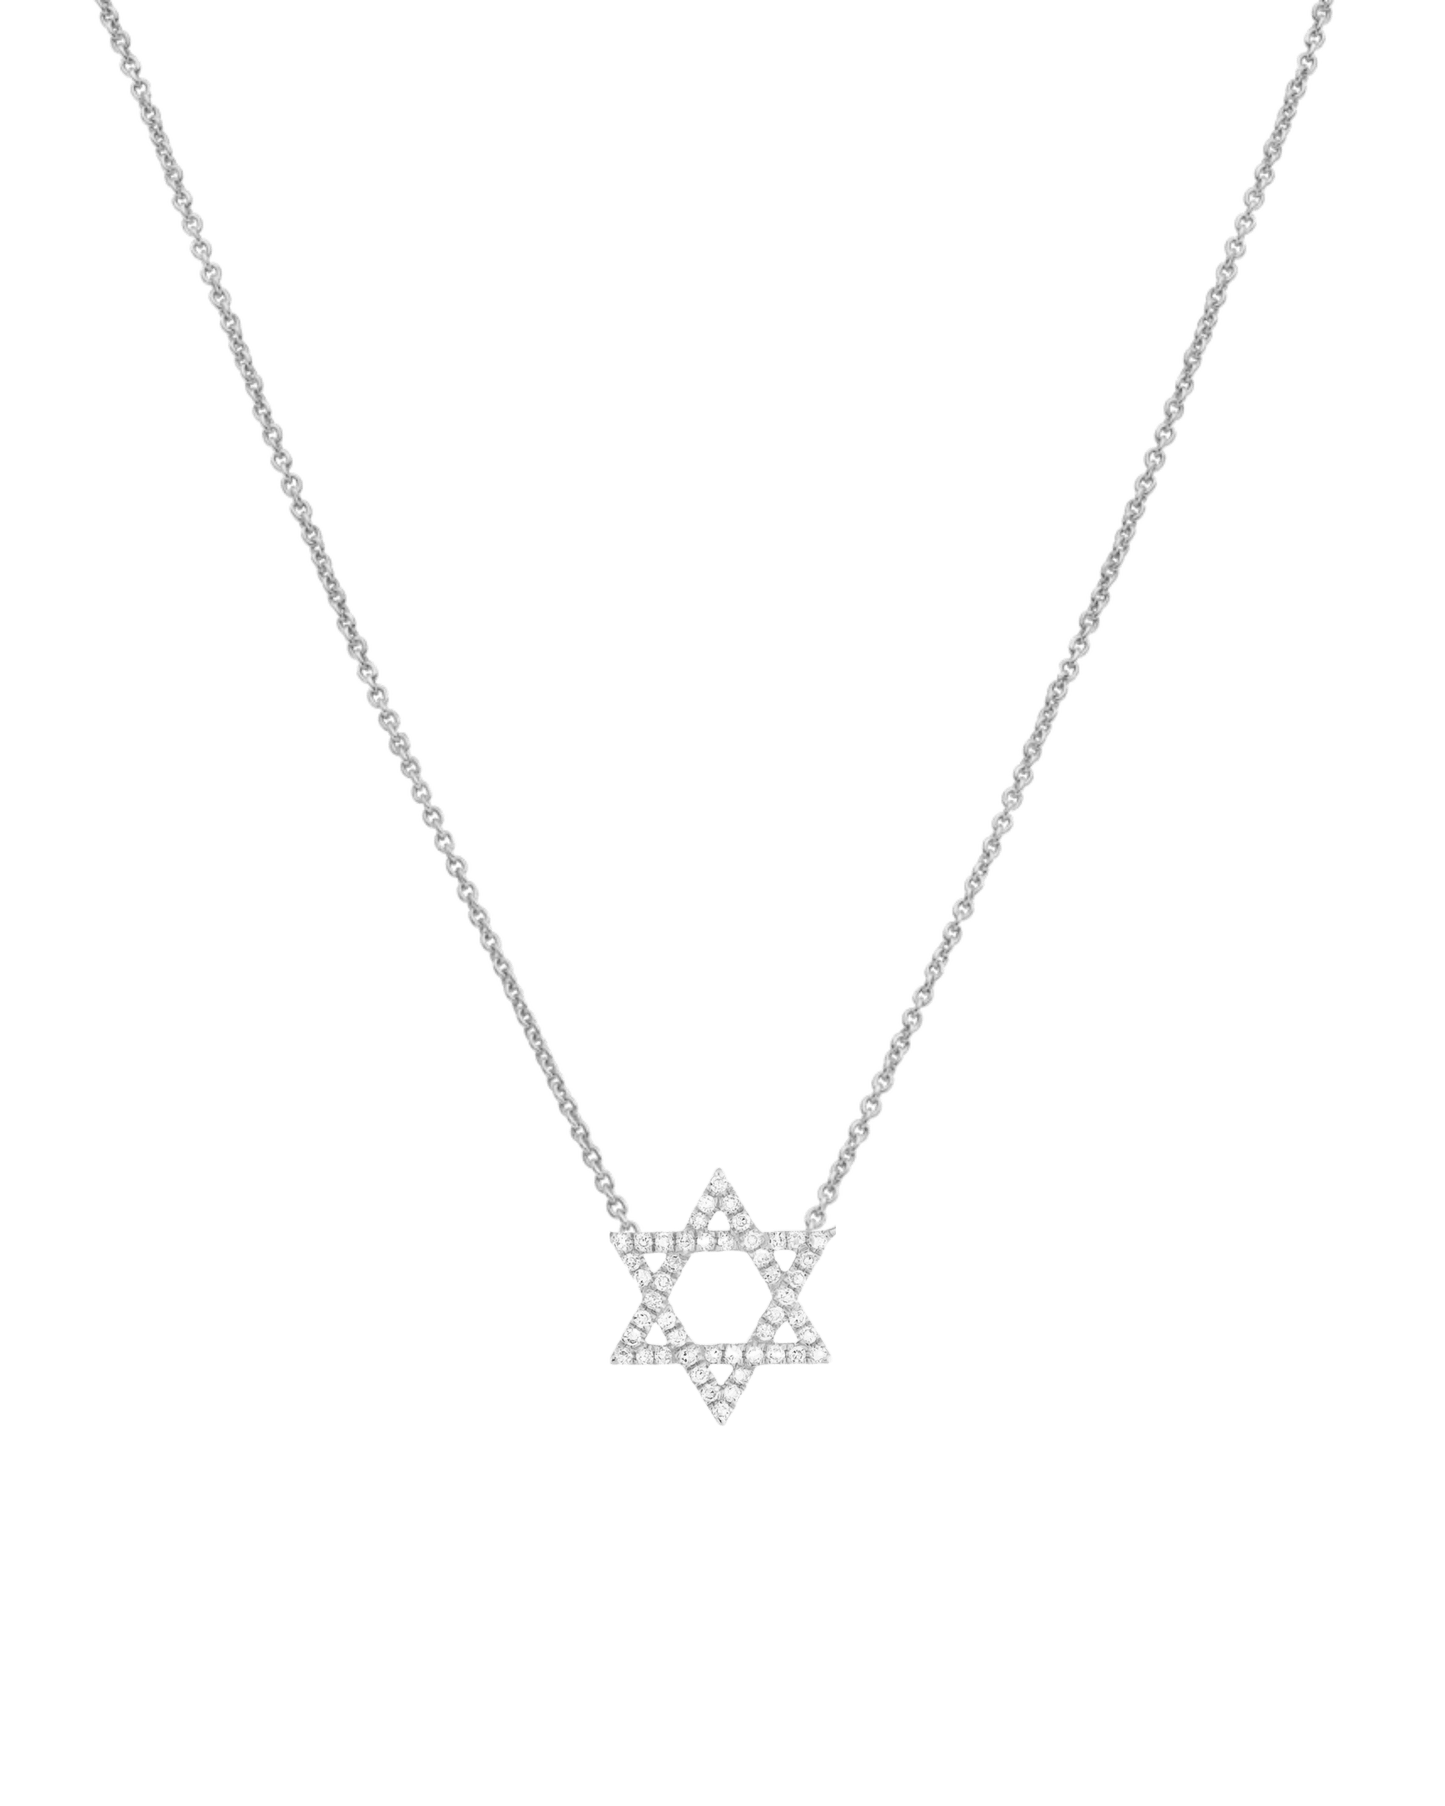 Star of David Necklace - 925 Sterling Silver Necklaces magal-dev White Zirconia 16” 